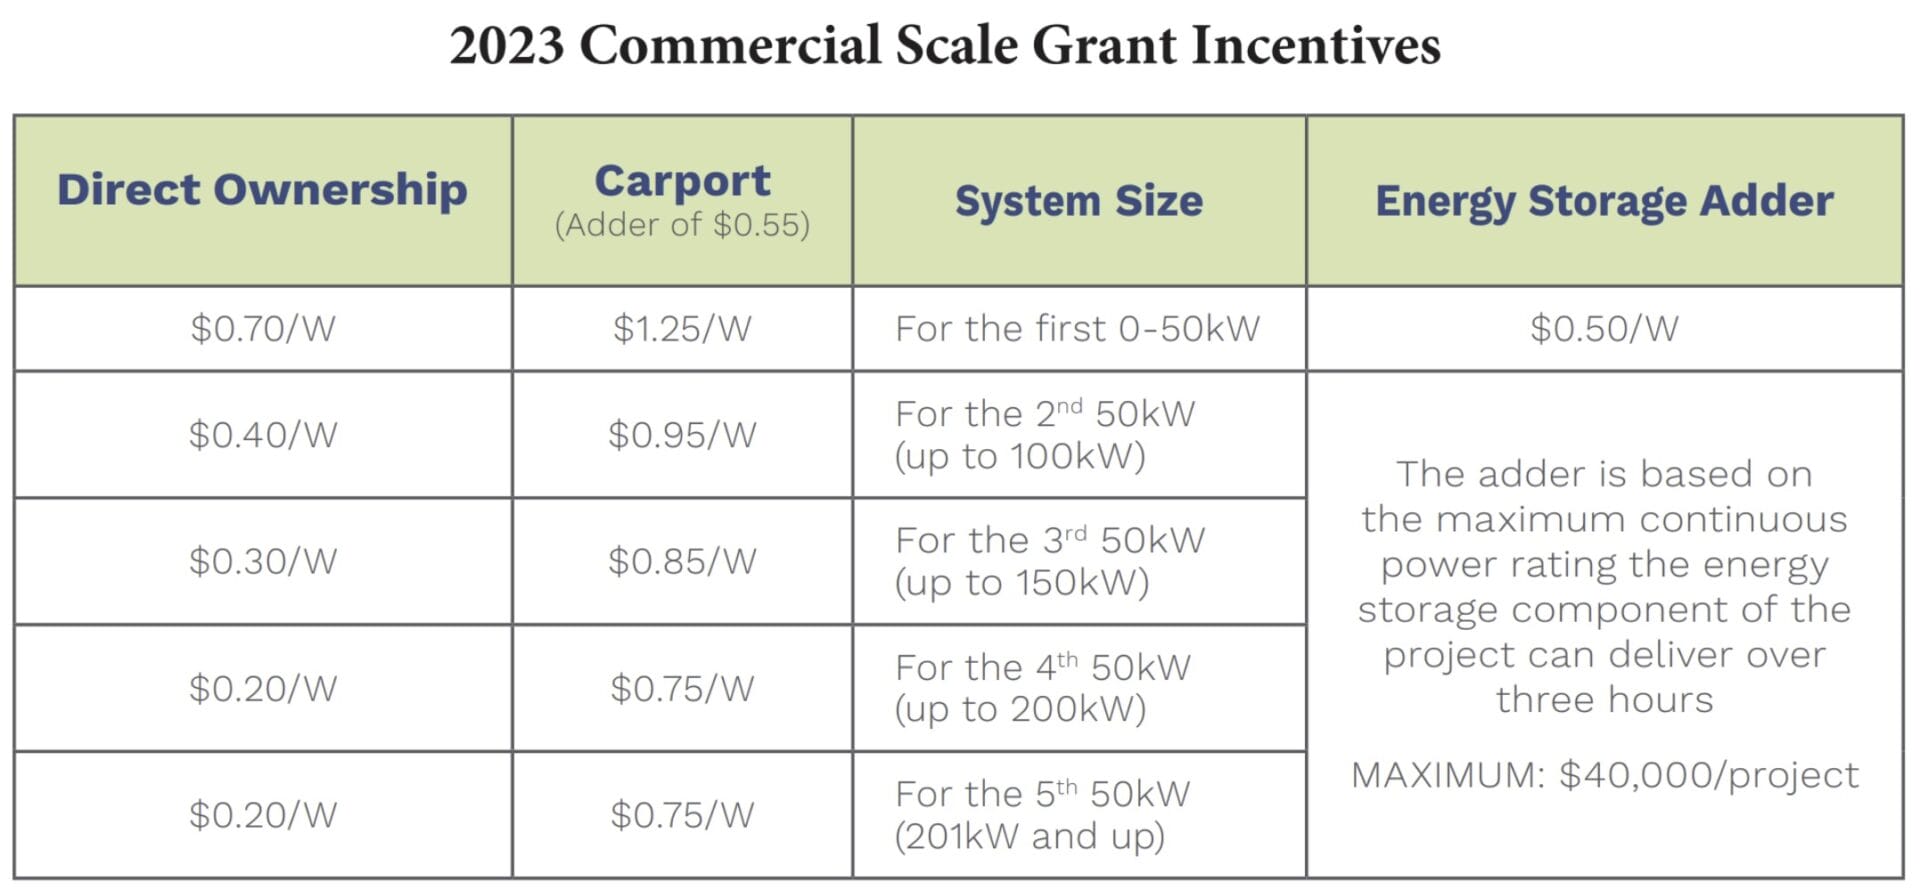 2023 commercial scale grant incentives